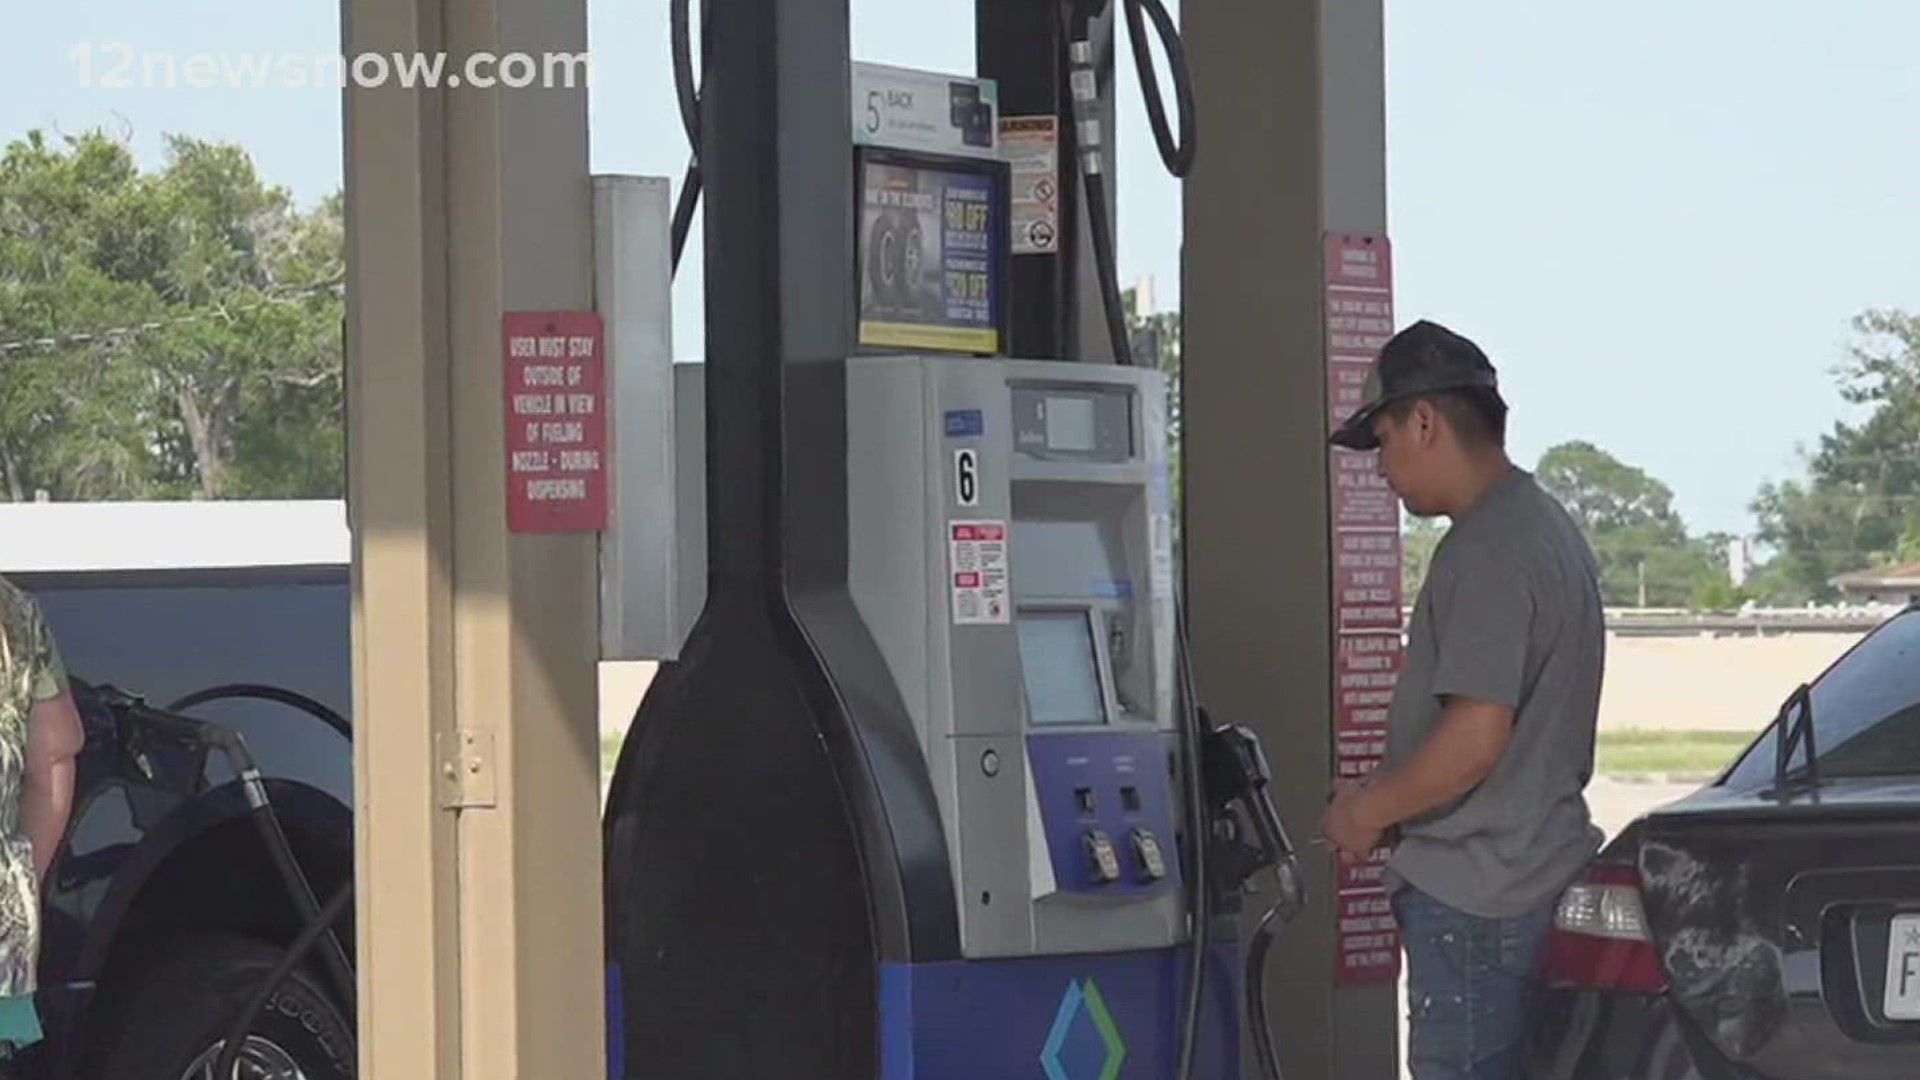 AAA says if you take certain measures, you can possibly relieve some of the pain at the pumps.